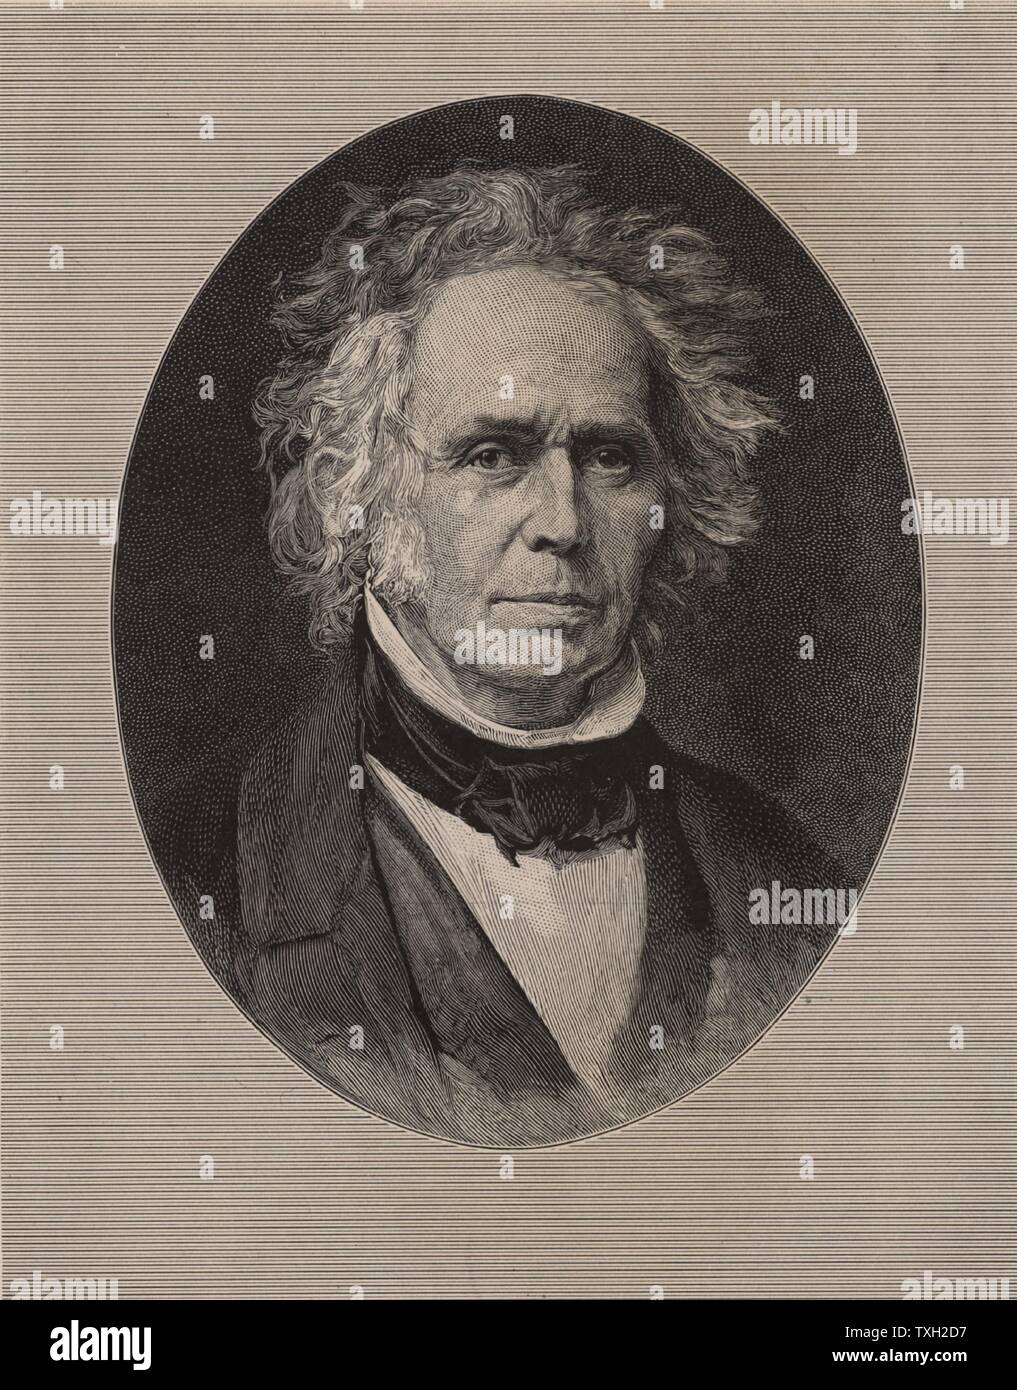 William Cranch Bond (1789-1859), American astronomer born in Falmouth (now Portland), Maine.   First director of Harvard University Observatory (1840).  He independently discovered the Great Comet of 1811 and was a pioneer of astrophotography. Engraving, 1896. Stock Photo